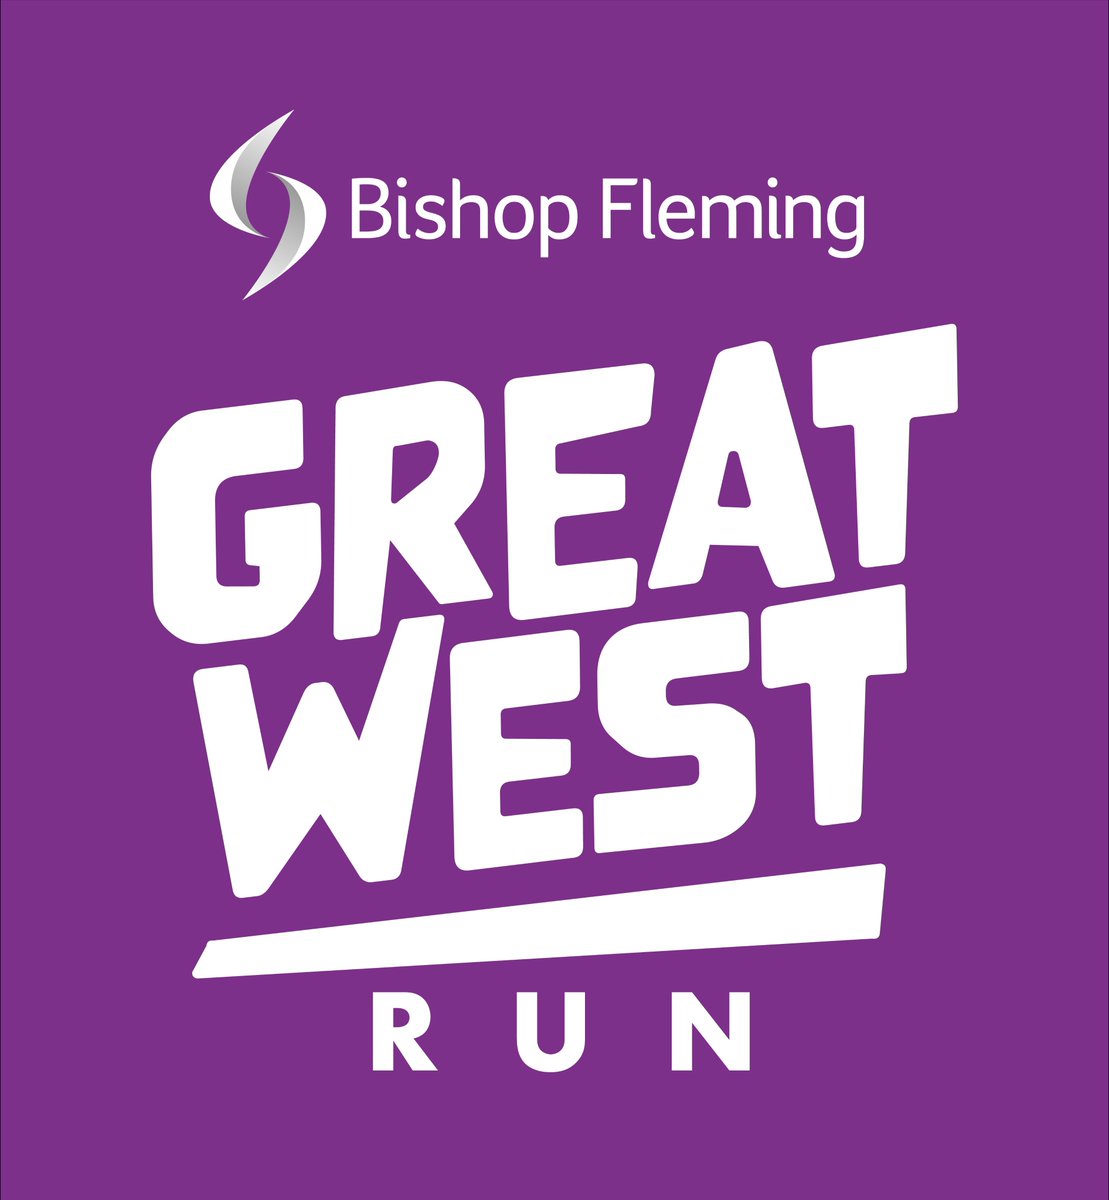 #WestCountry NASS supporters! The #GreatWestRun is coming up on 26 May, where you can run an exciting route through the heart of #Exeter city centre, followed by pretty country lanes and stunning views! Sign up and raise vital funds for #NASS: runforcharity.com/national-axial… #axialspA